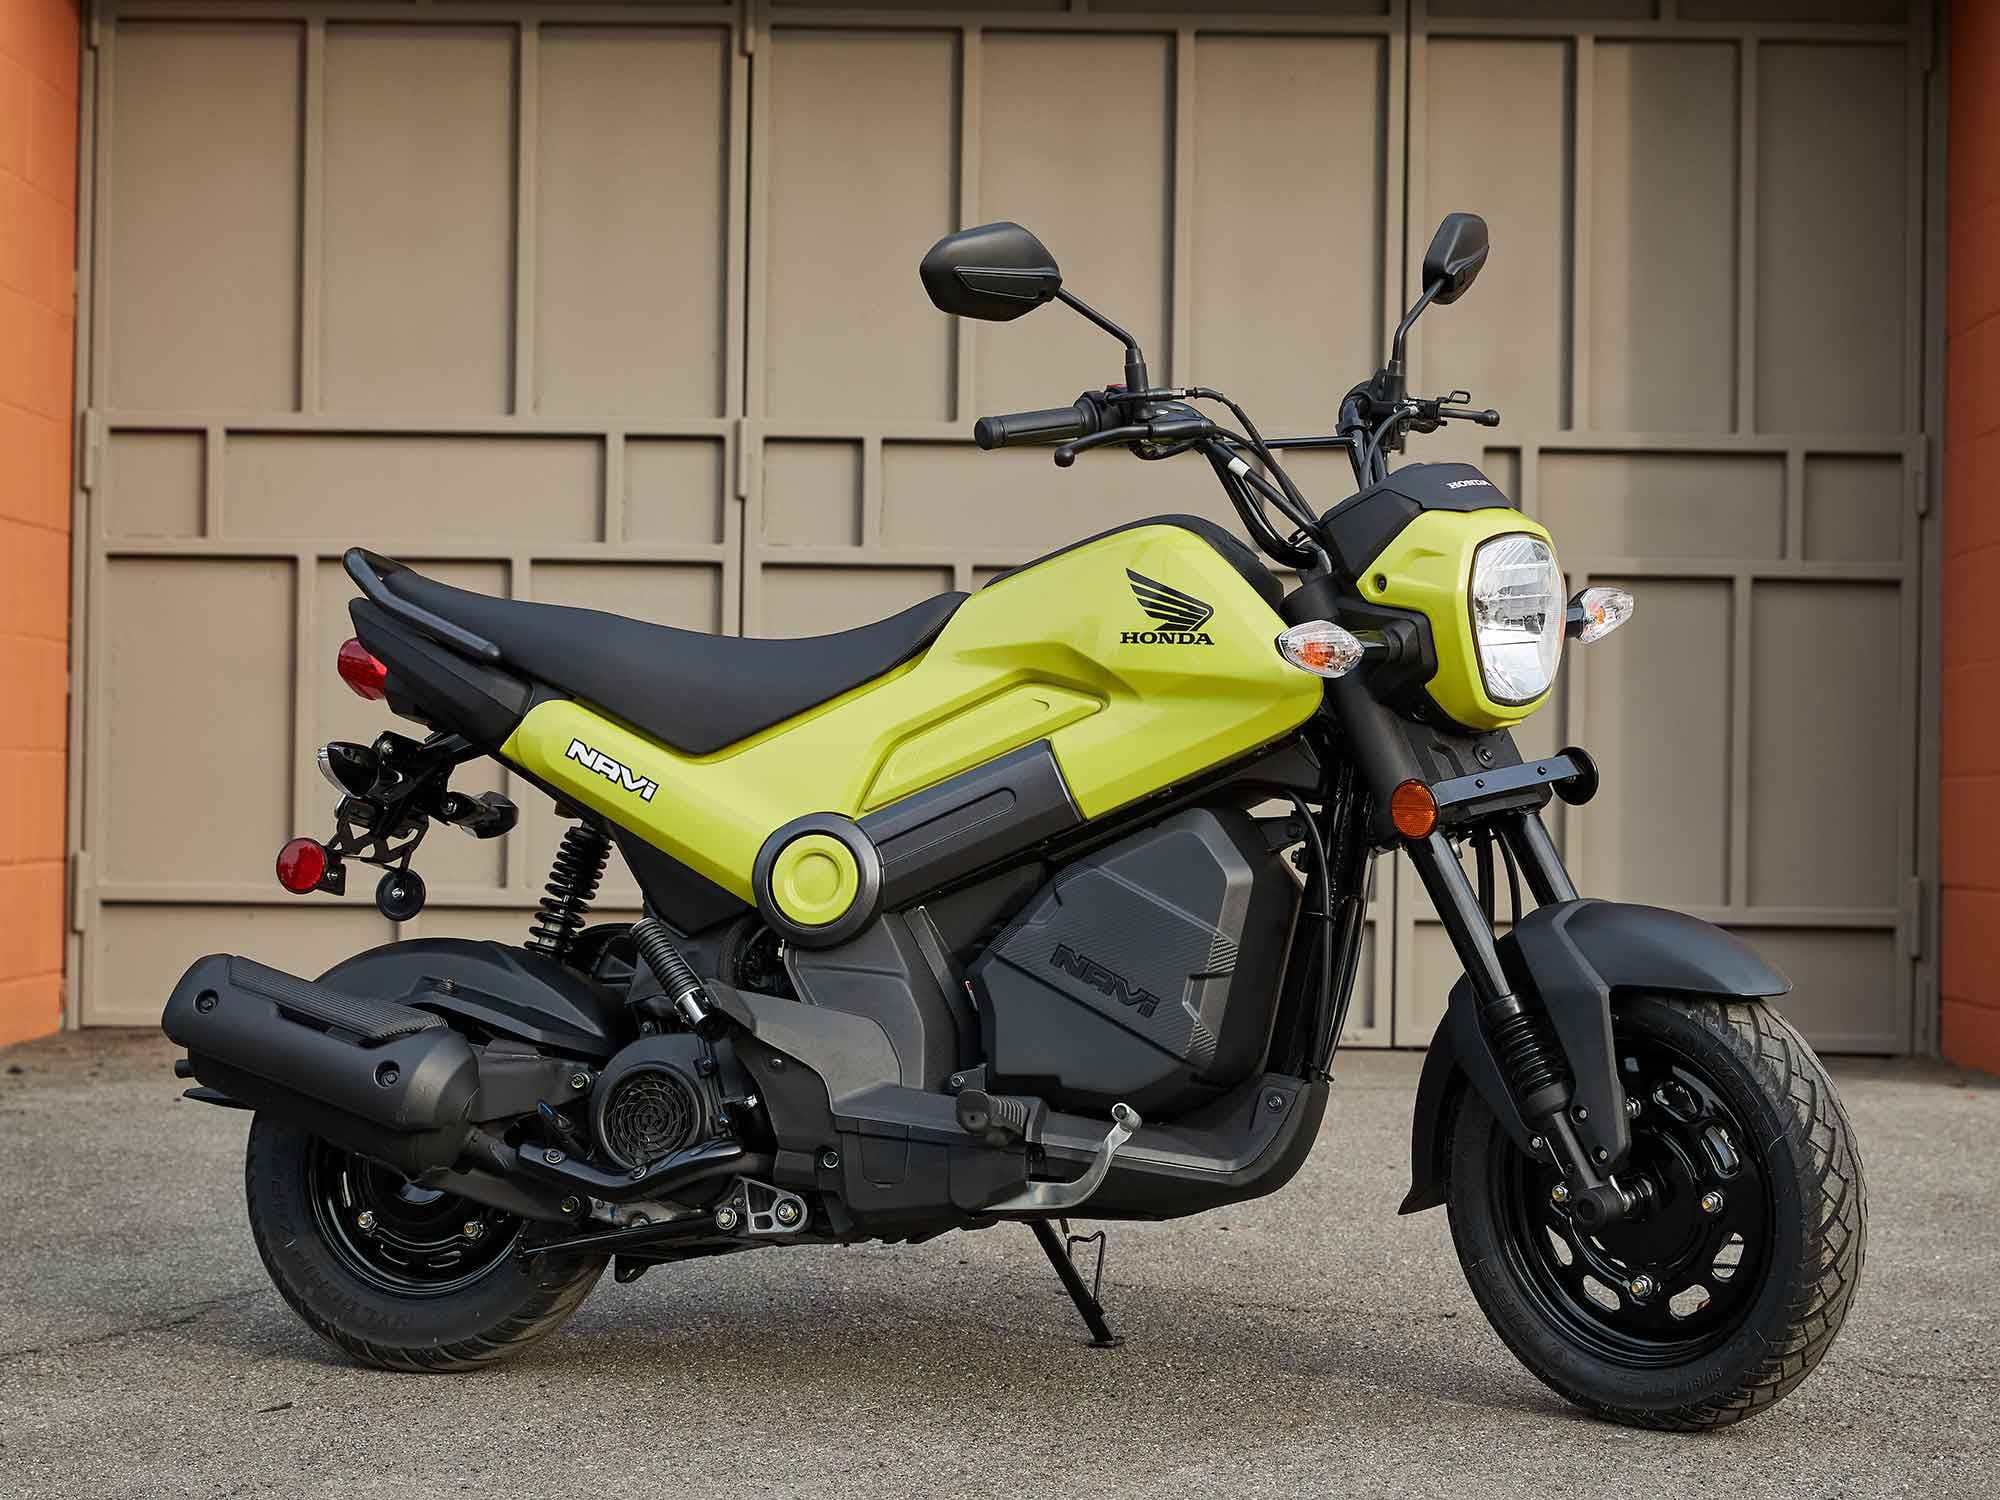 A motorcycle-like layout, including footpegs and a rear brake pedal, set the Navi apart from its scooter competition.